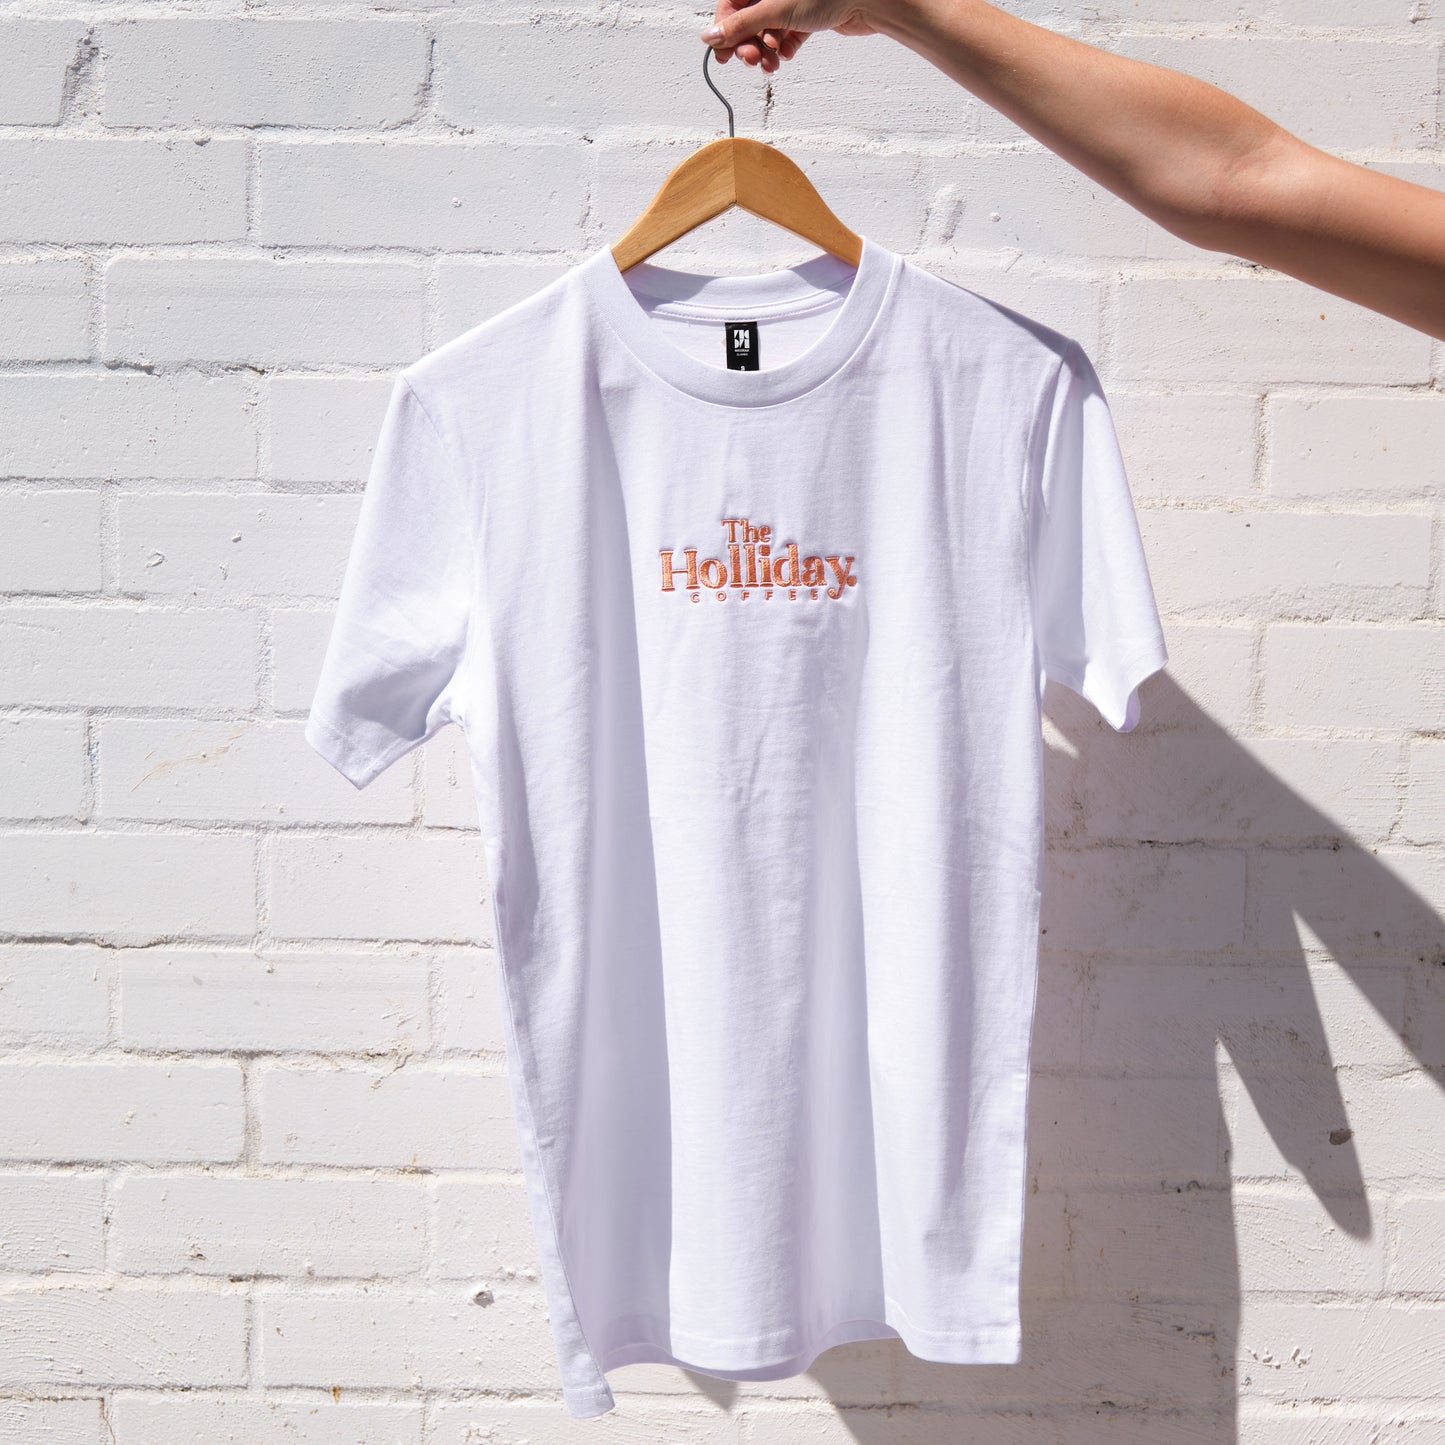 The Holliday. Classic Tee White